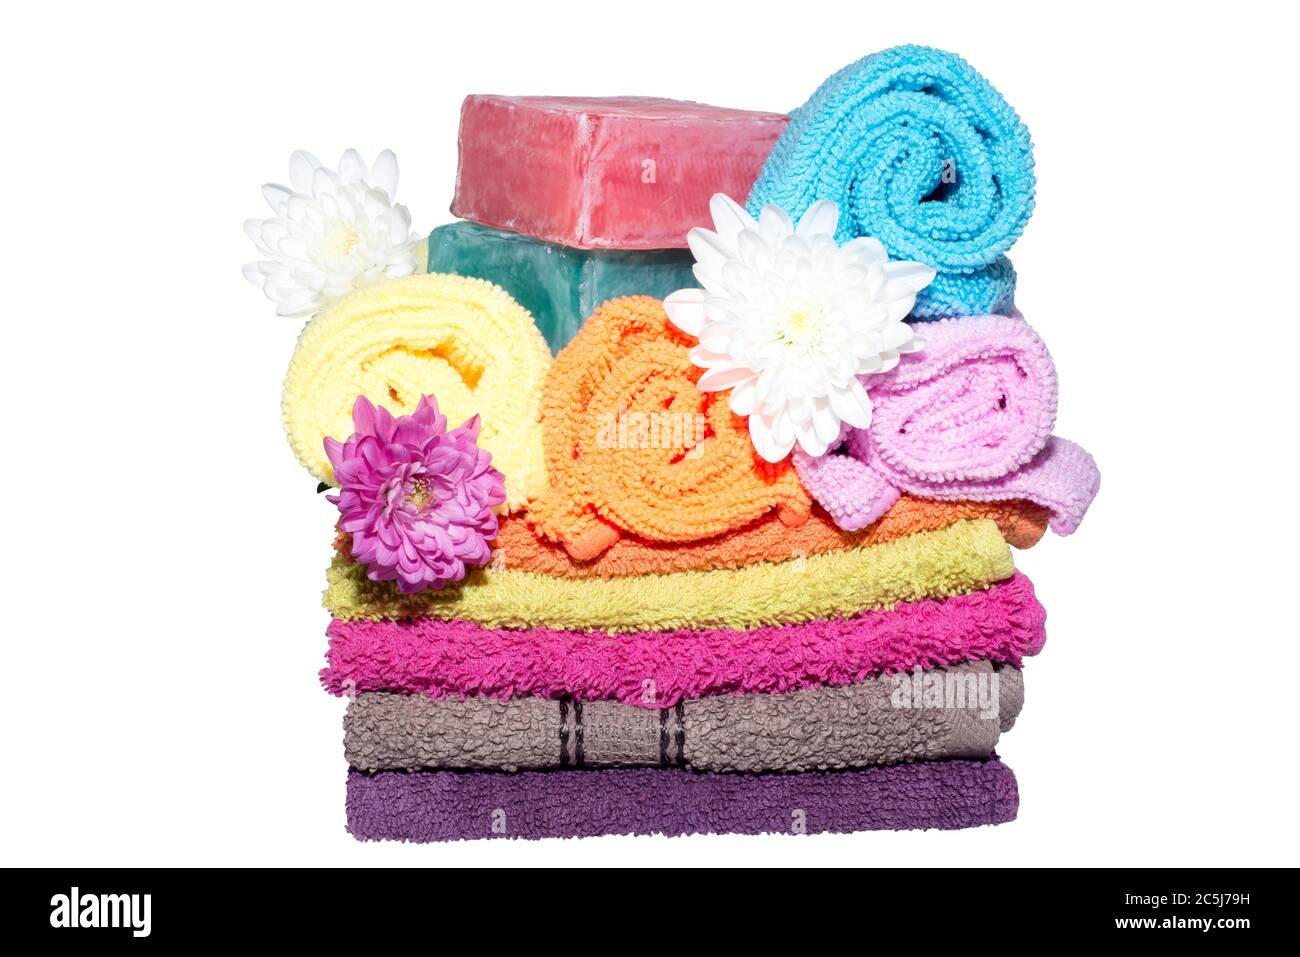 soap bars on facecloths off various shades with some in rolls and flowers Stock Photo